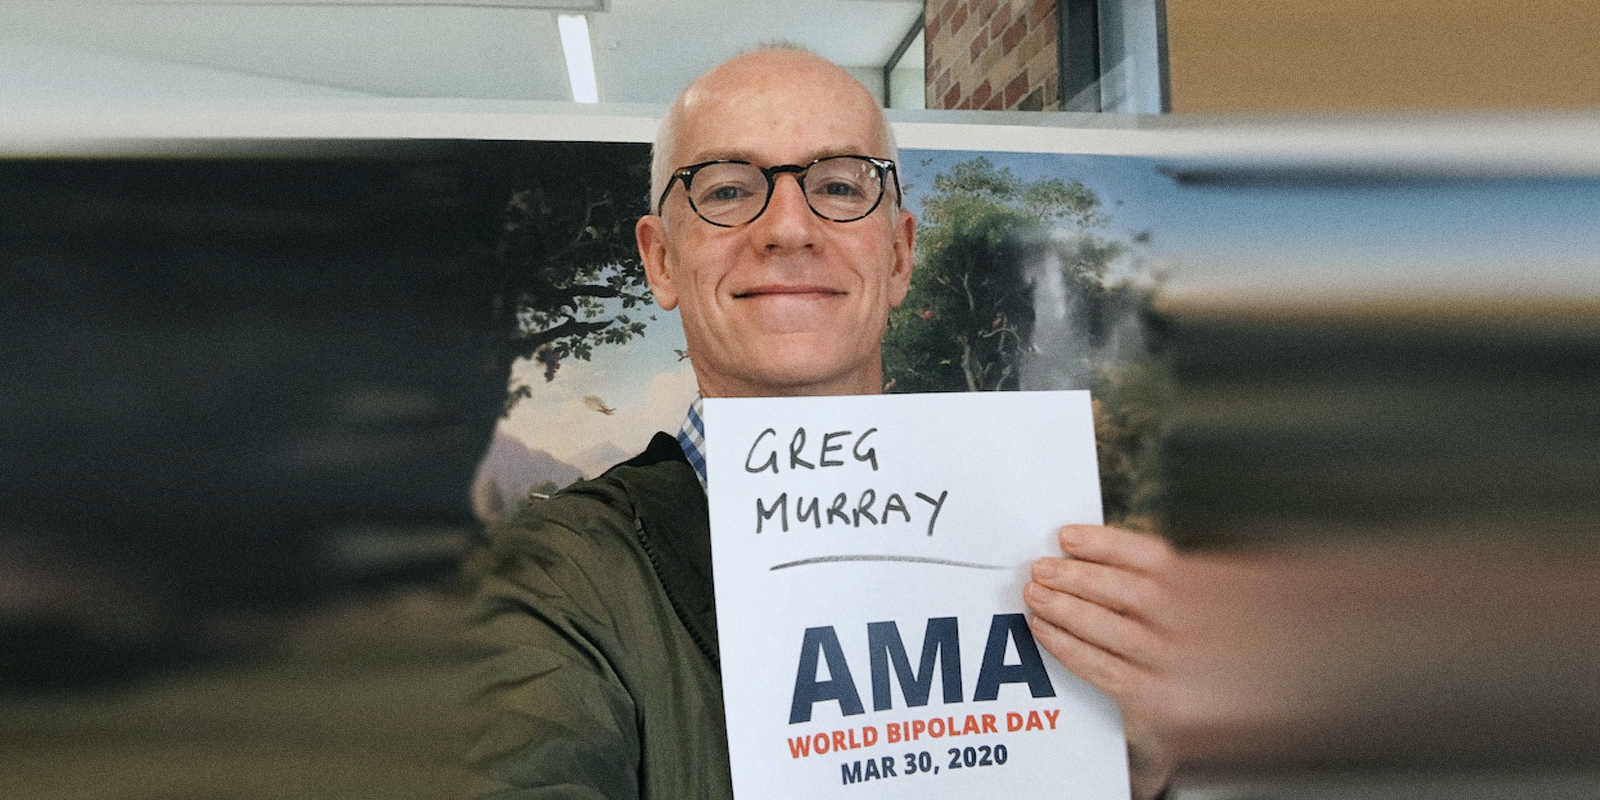 Greg sitting in an office, holding a sign proving he will be involved in the bipolar ama.